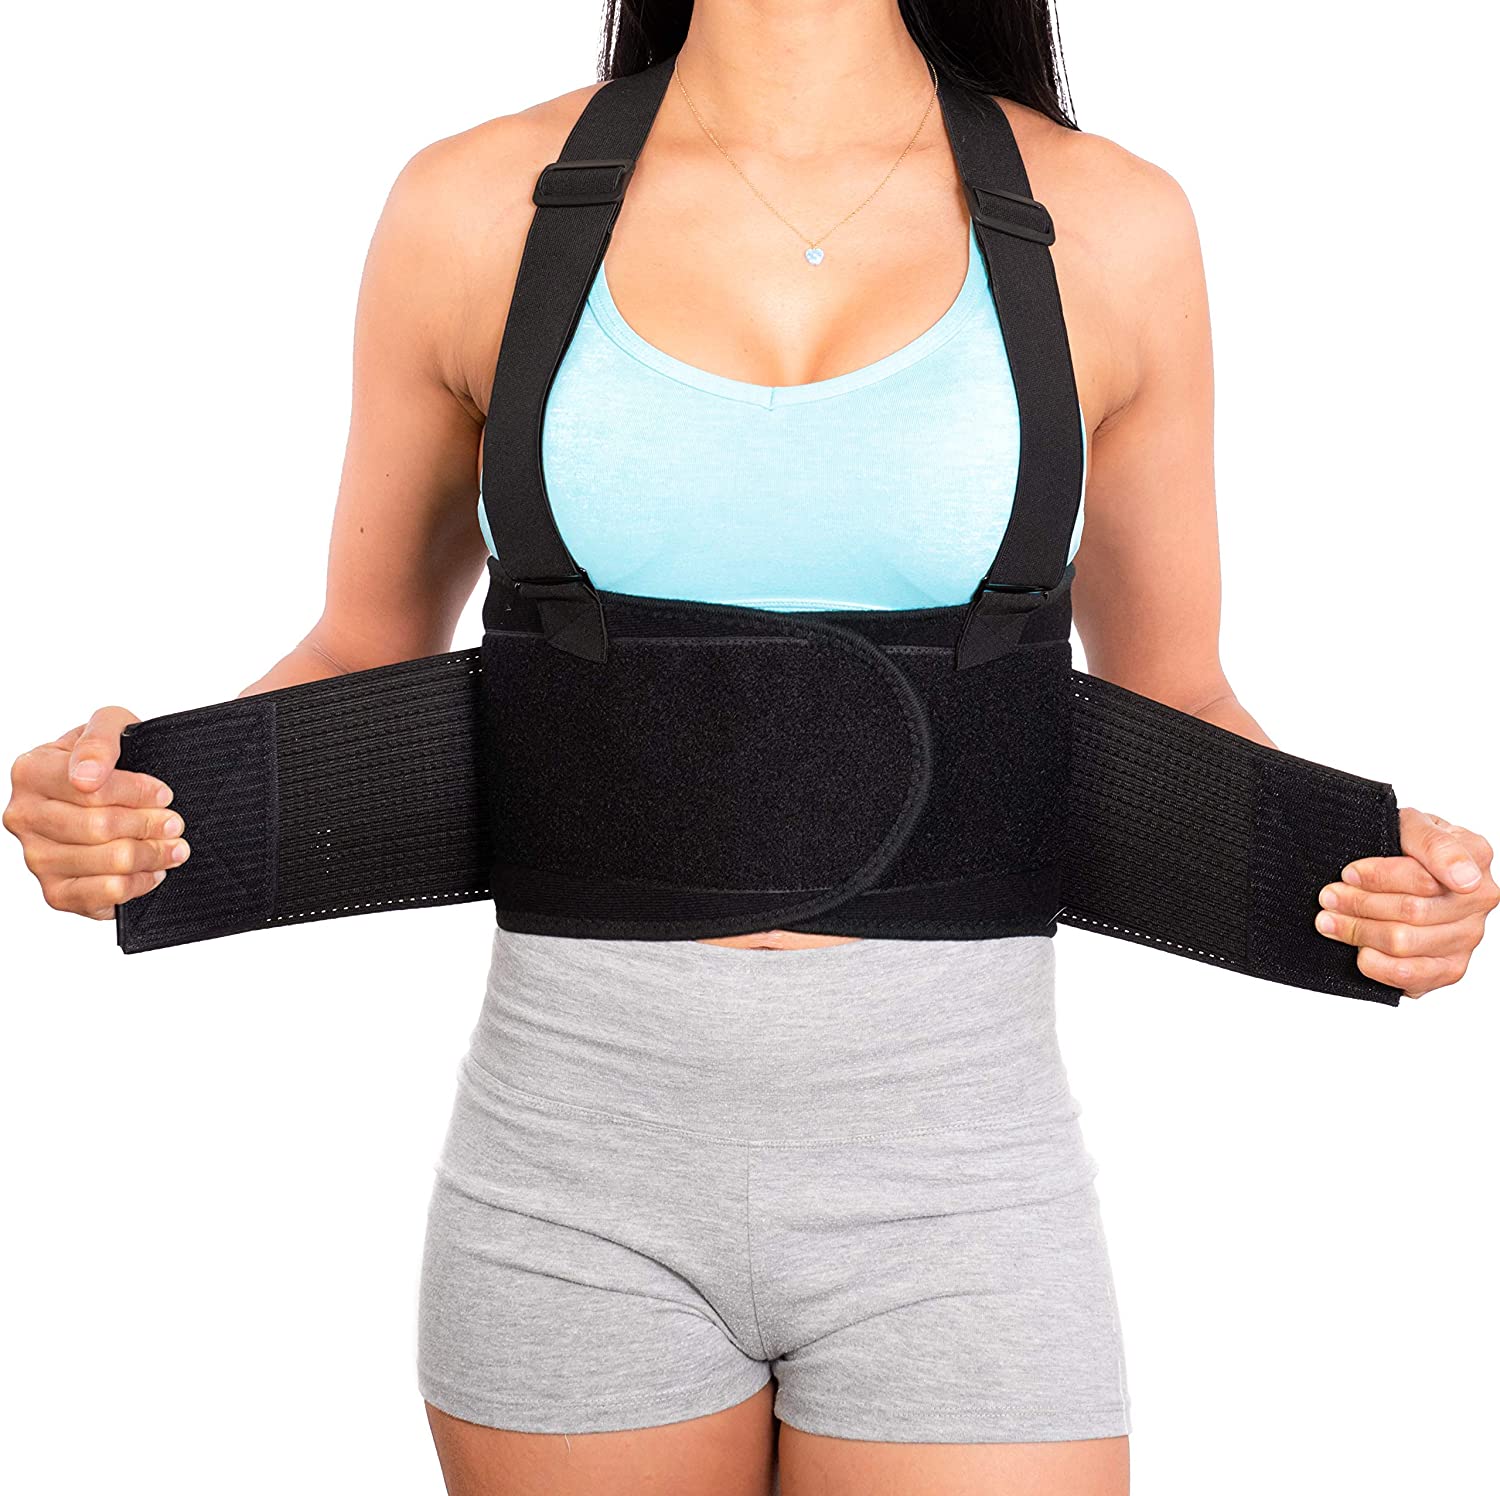 Lumbarmate Orthopedic Lumbar Support Belt With Steel Plates, Back Pain  Relief